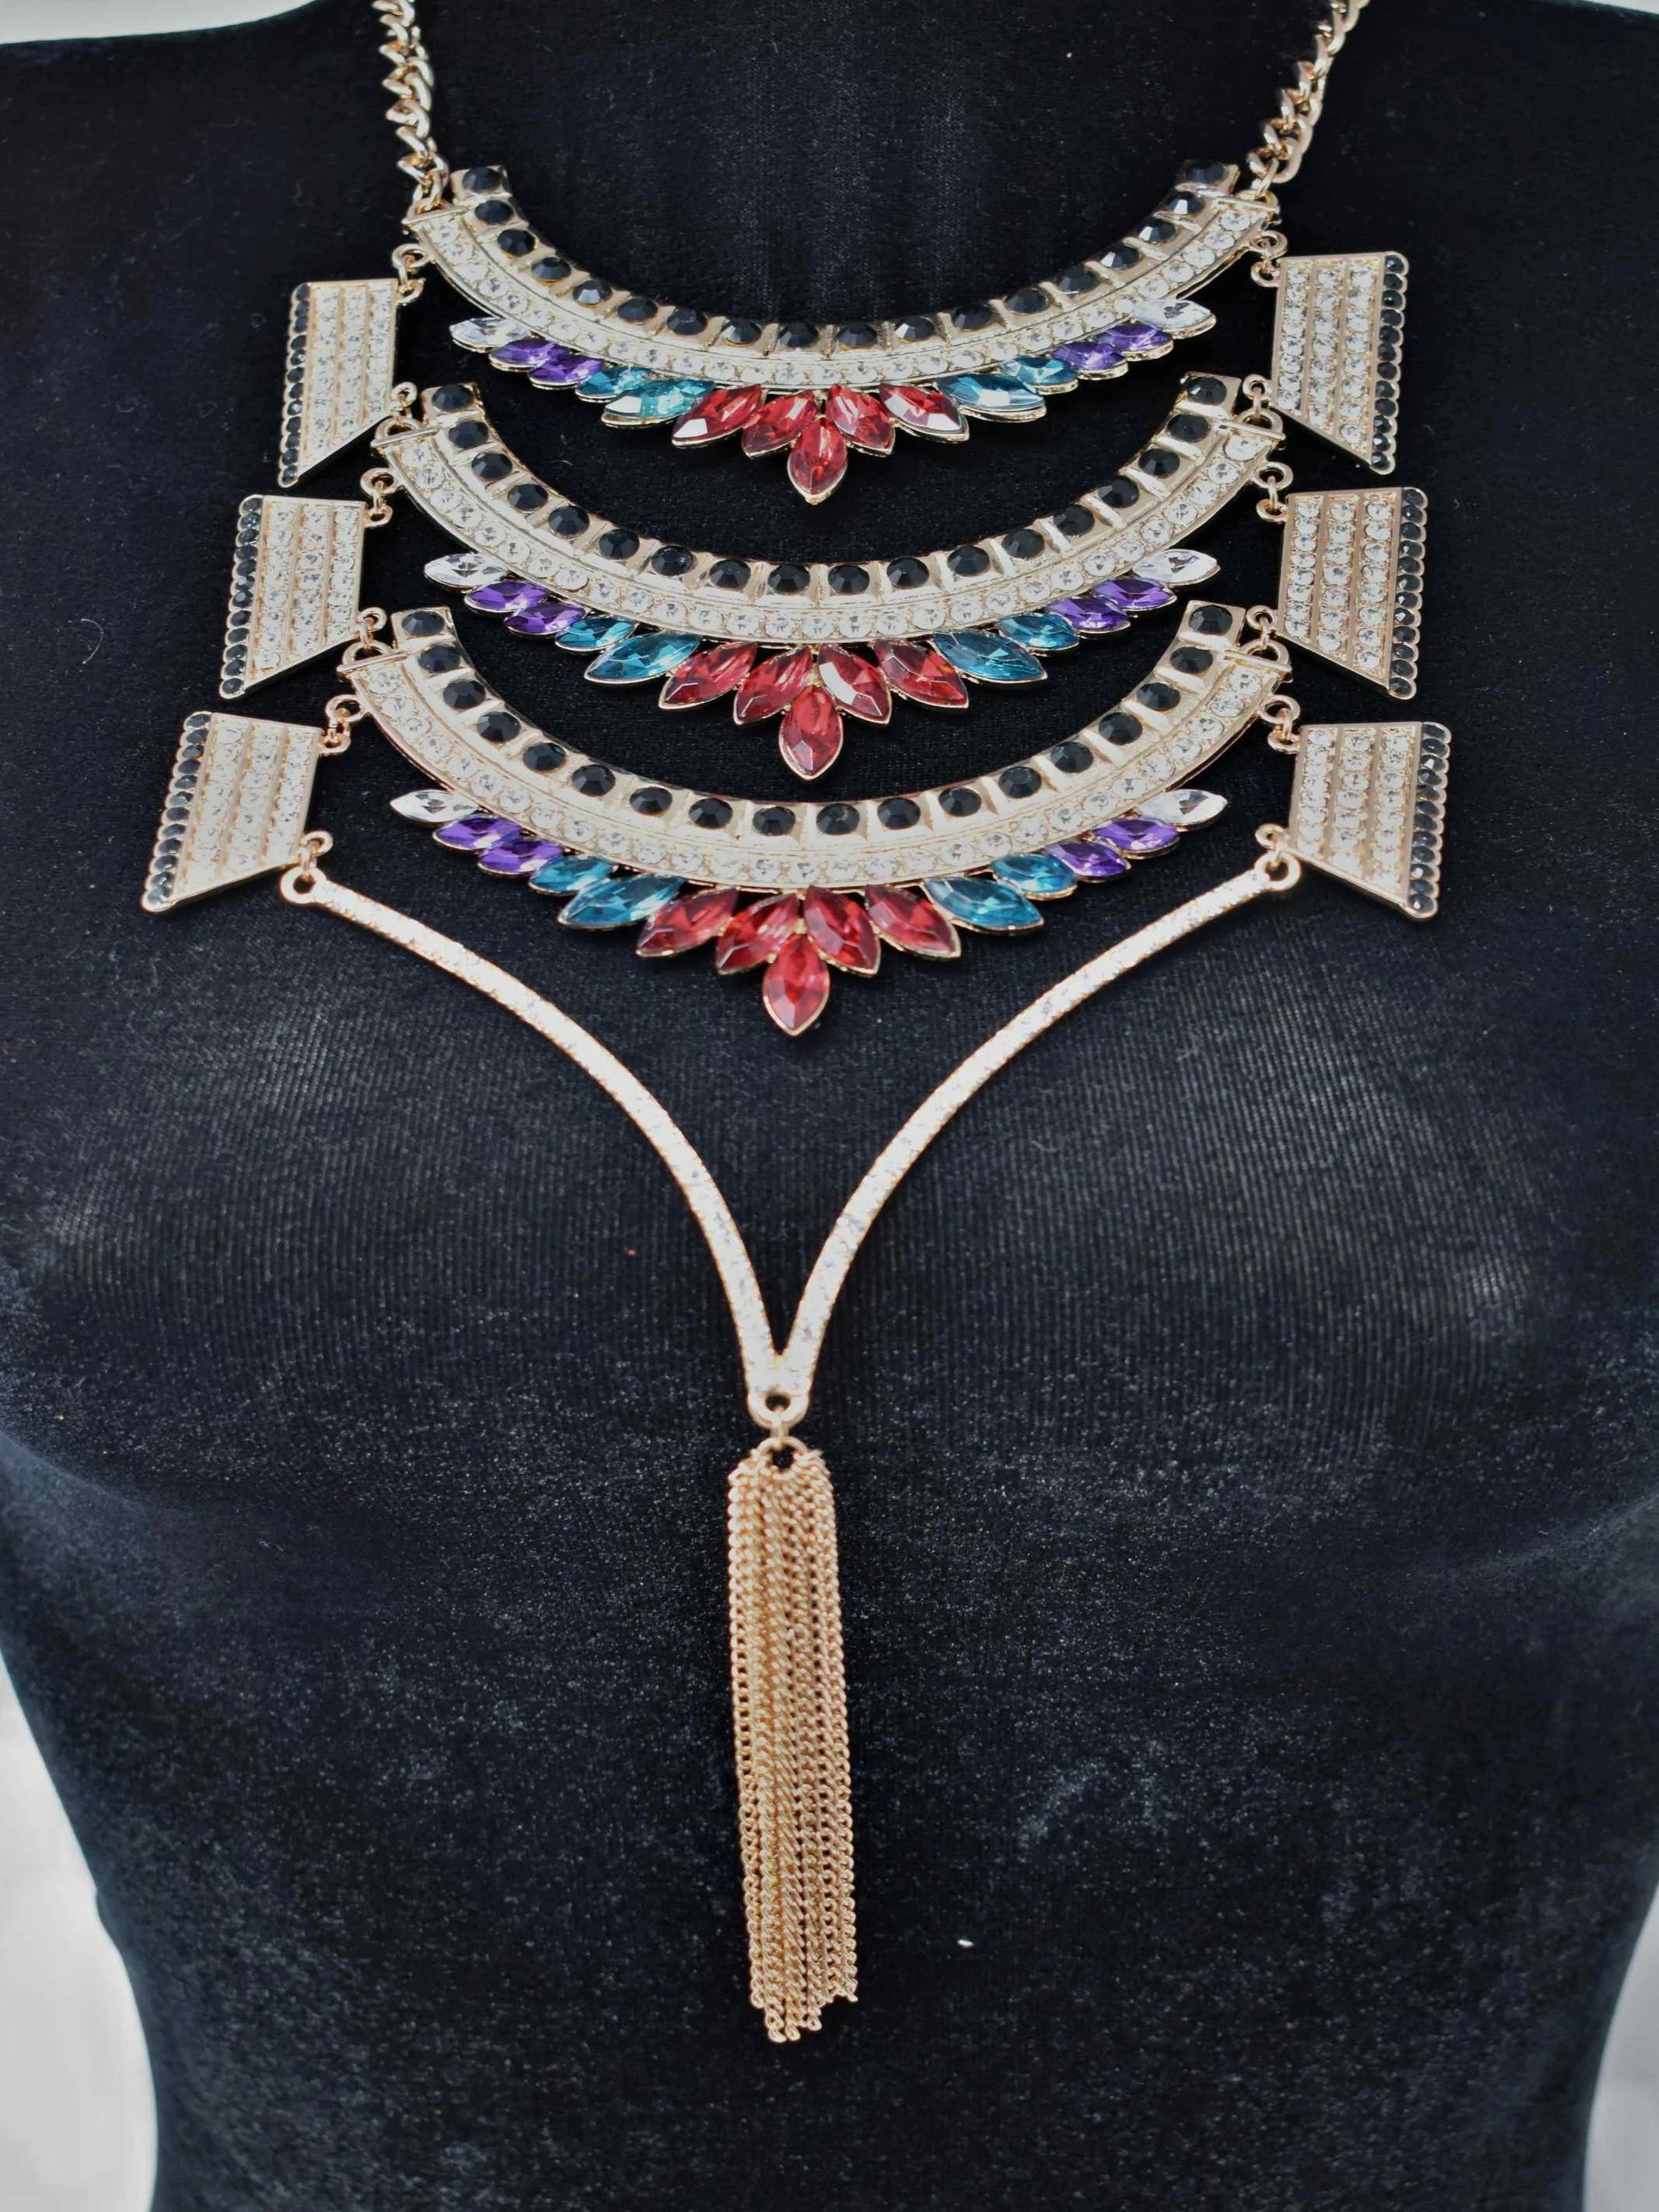 Dare to dazzle with our Greta statement necklace. This Gold necklace is a stunner with its multicolor stones and fringe tassels. It measures around 17" in length and has a lobster clasp.